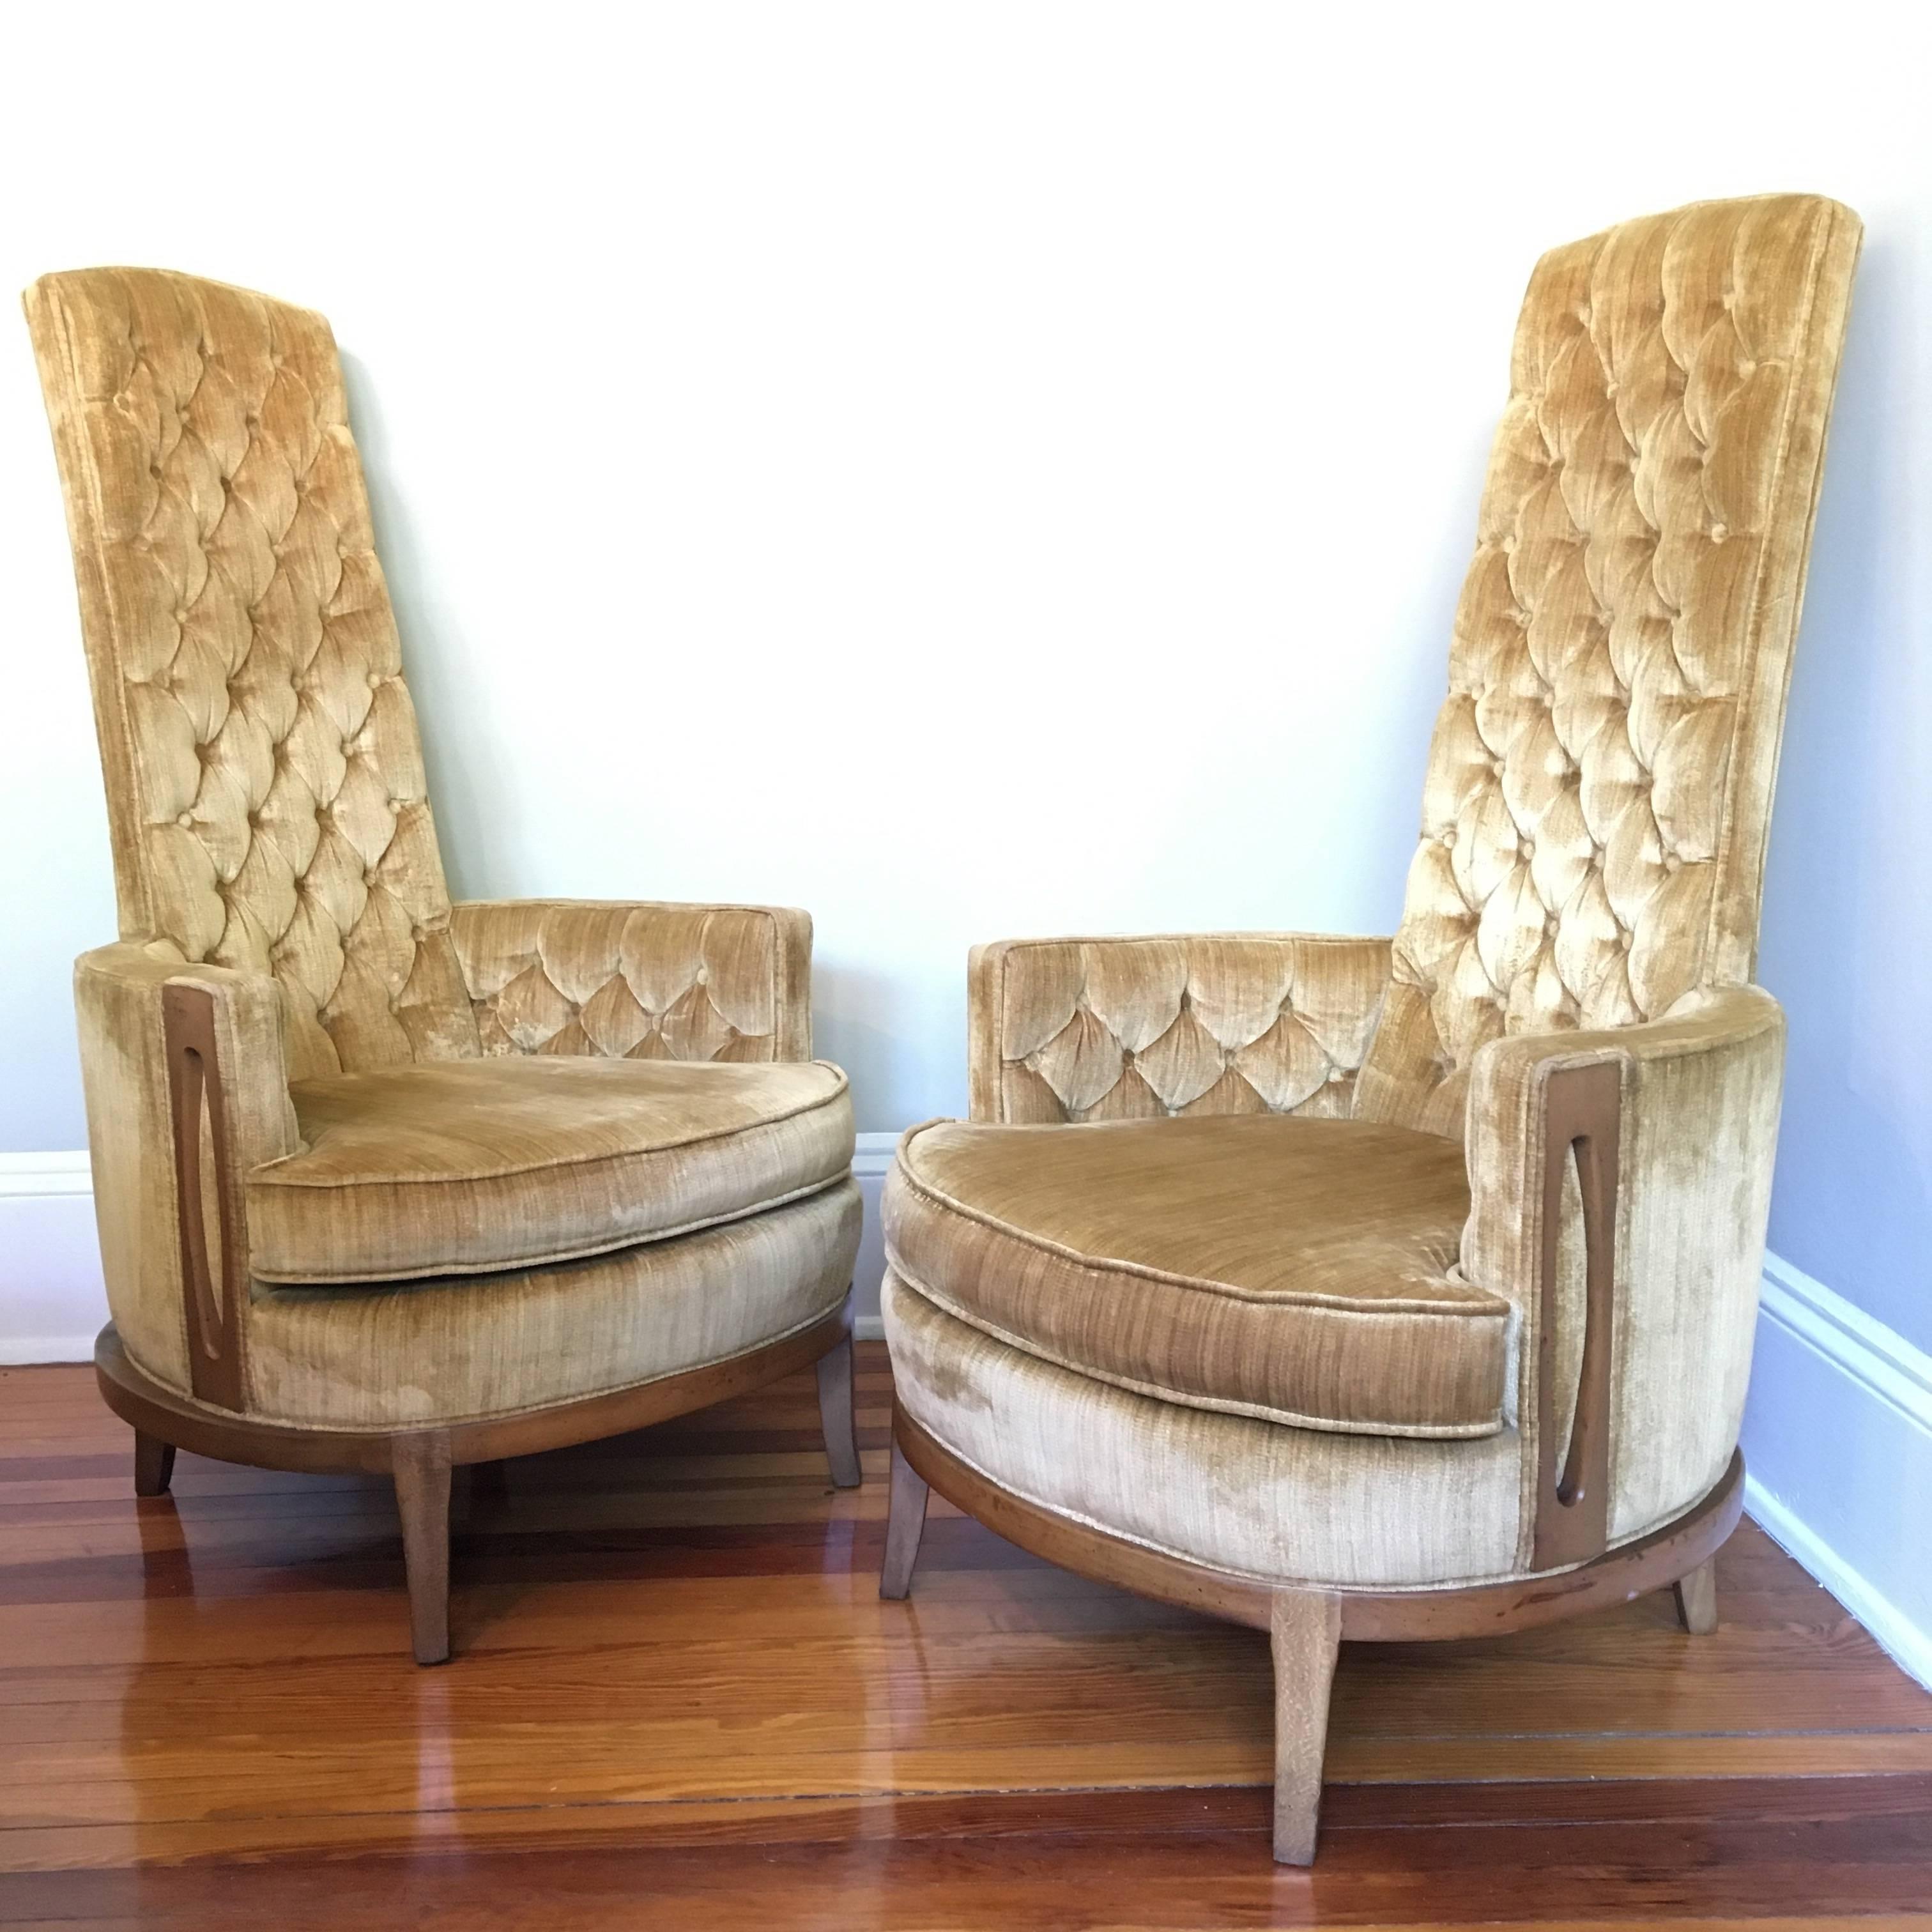 Striking pair of Mid-Century Hollywood Regency high back chairs in original burnished gold tufted velvet upholstery in excellent condition. Dramatic proportions are accented with Mid-Mod wood side panels in the manner of Adrian Pearsall. Strong,